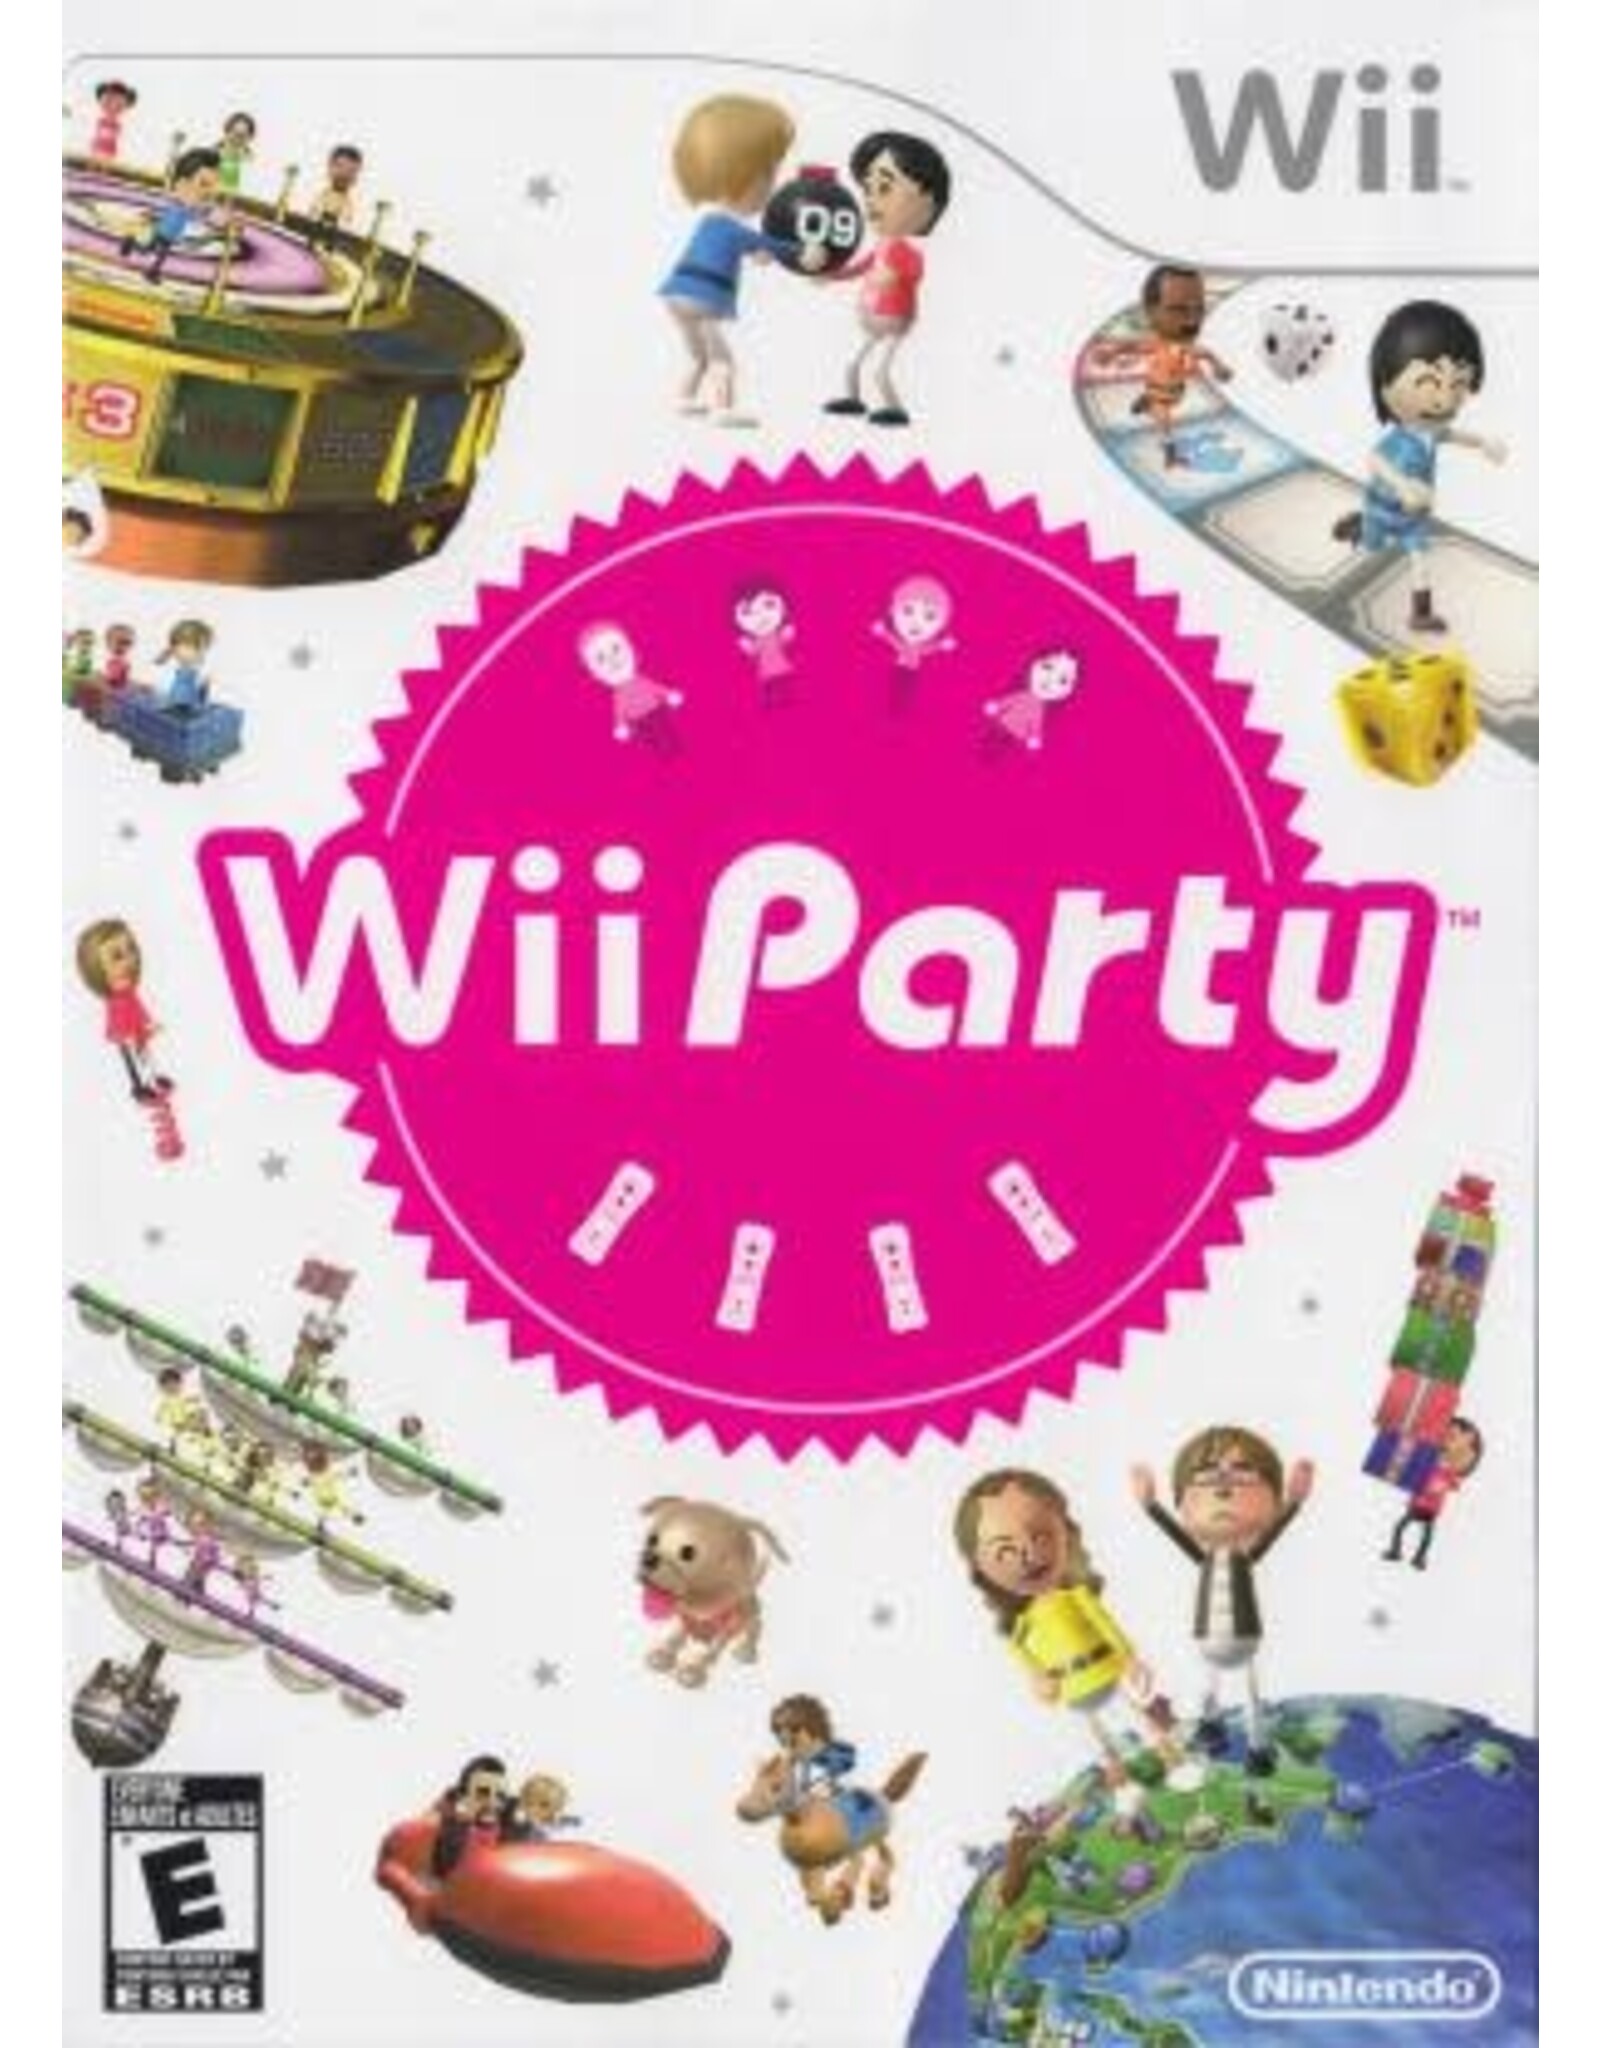 Wii Wii Party (Used)